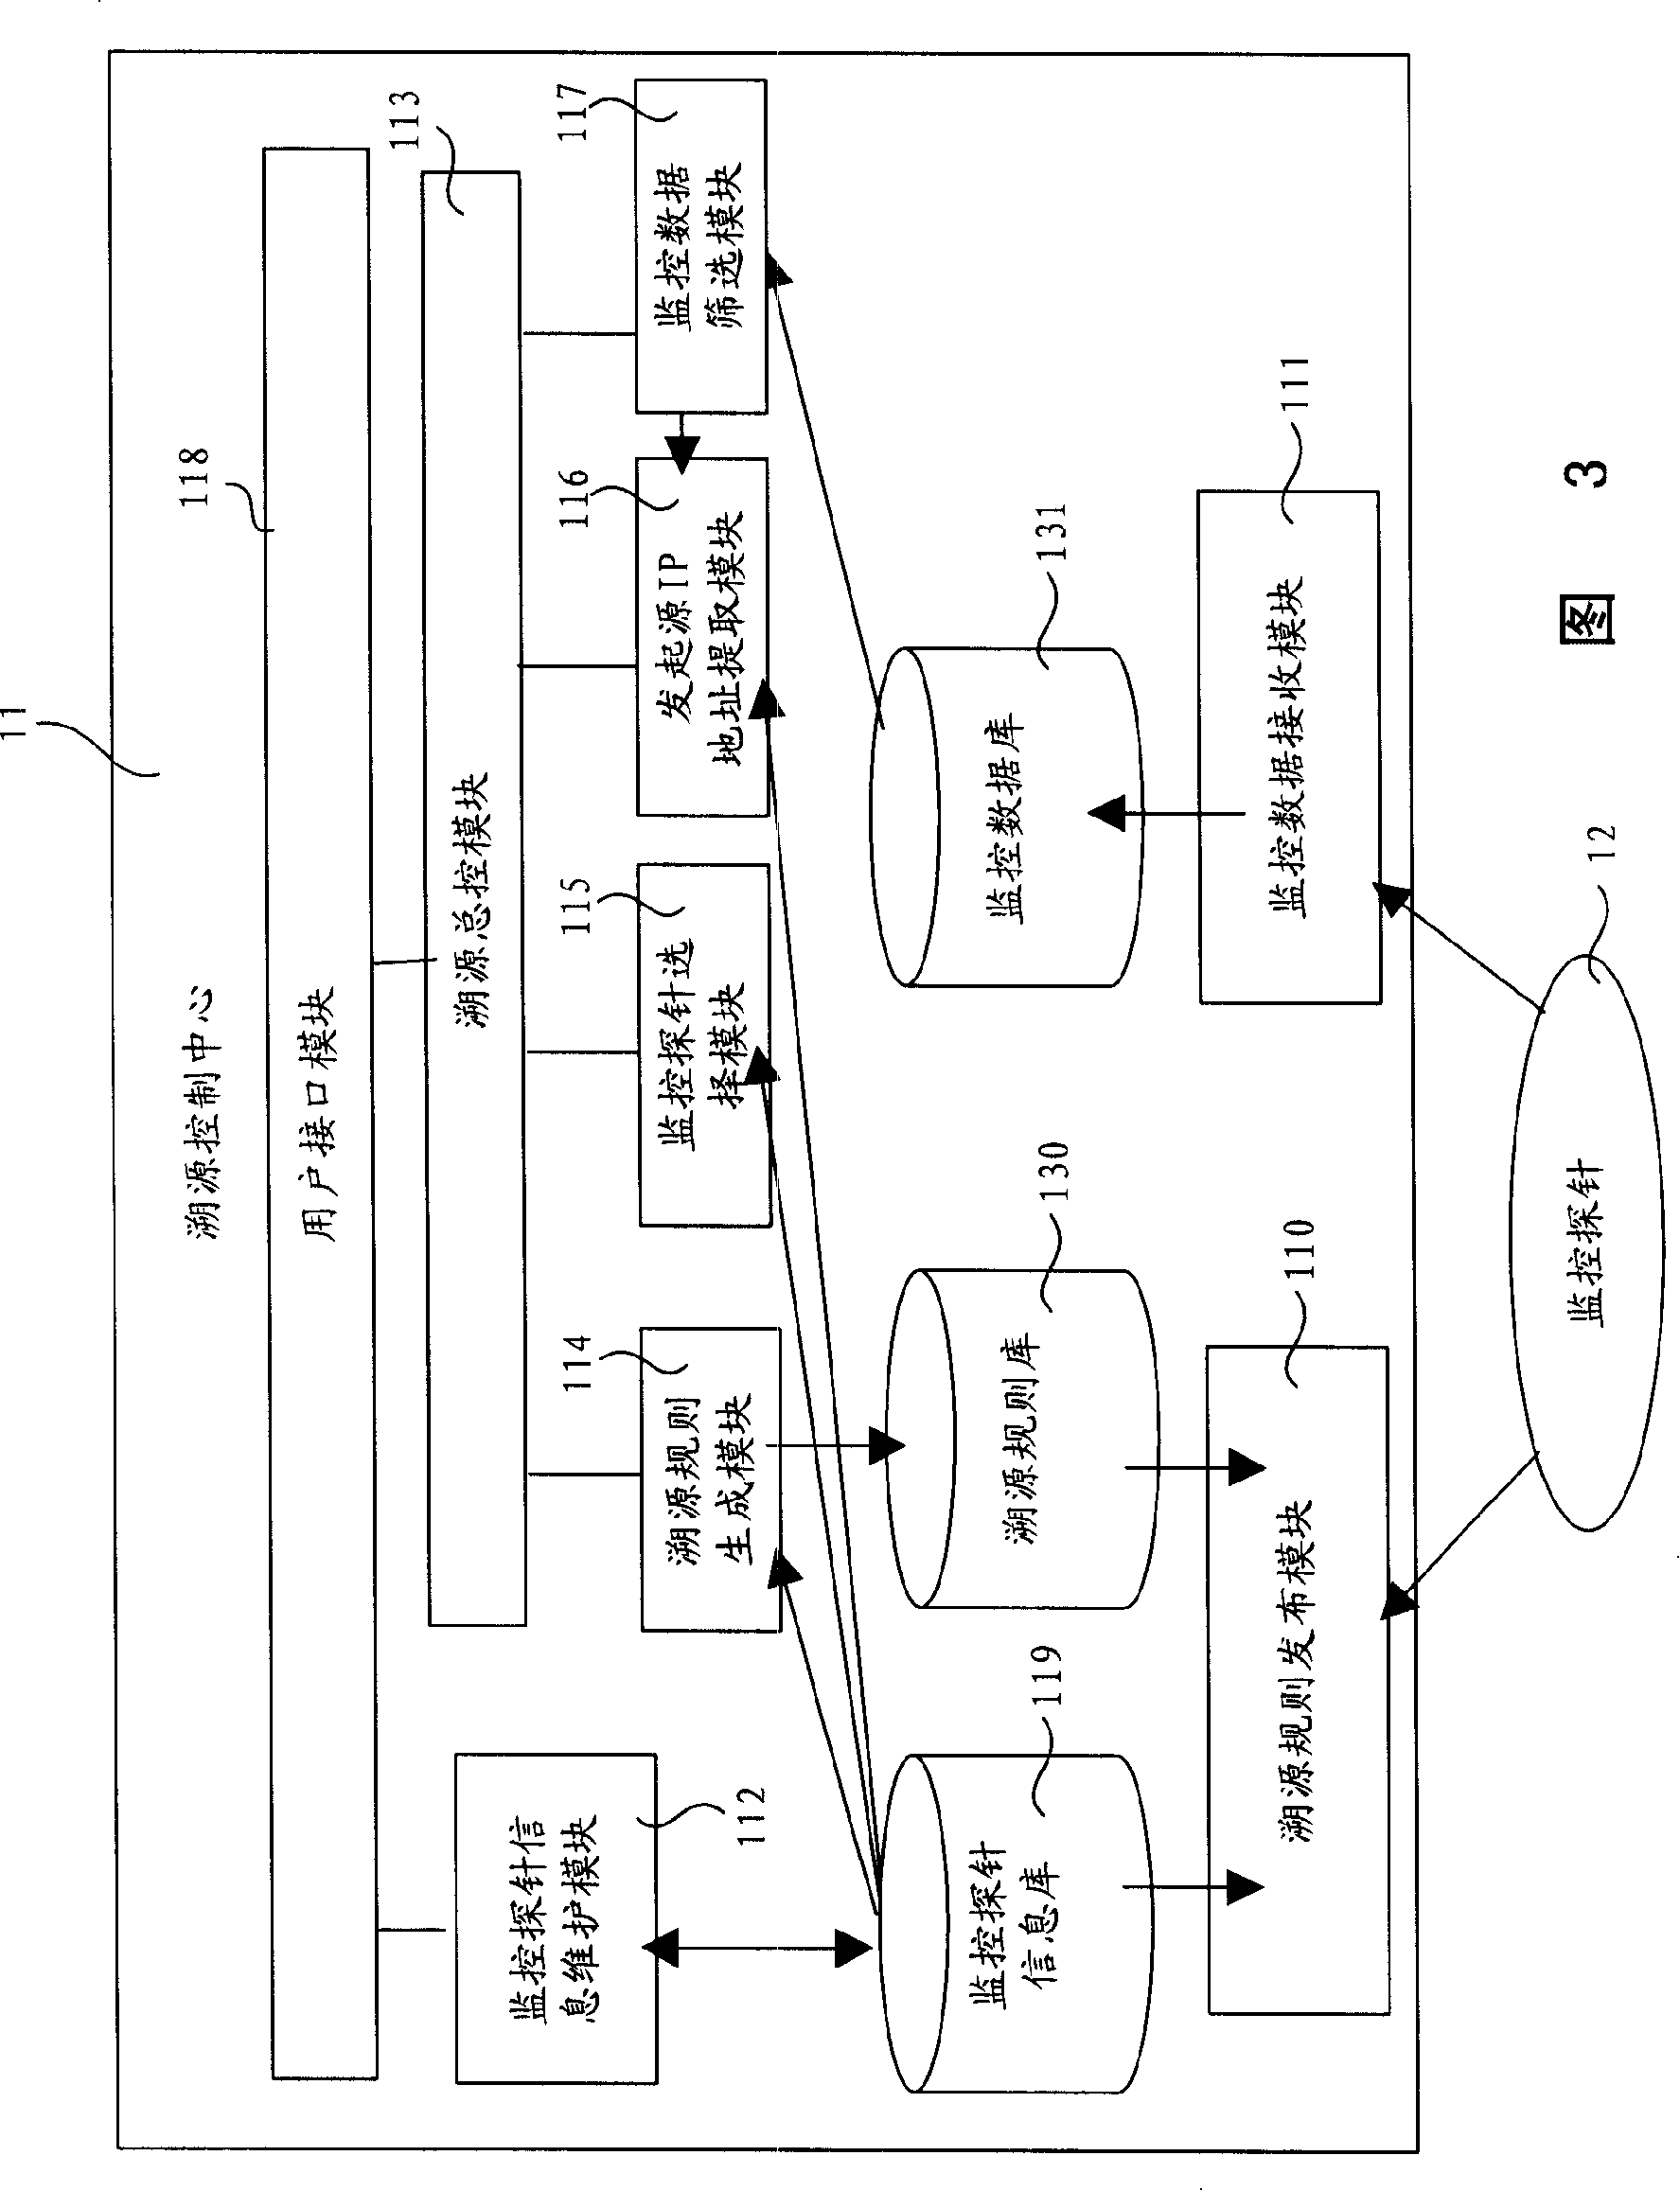 Detecting probe interlock based network security event tracking system and method